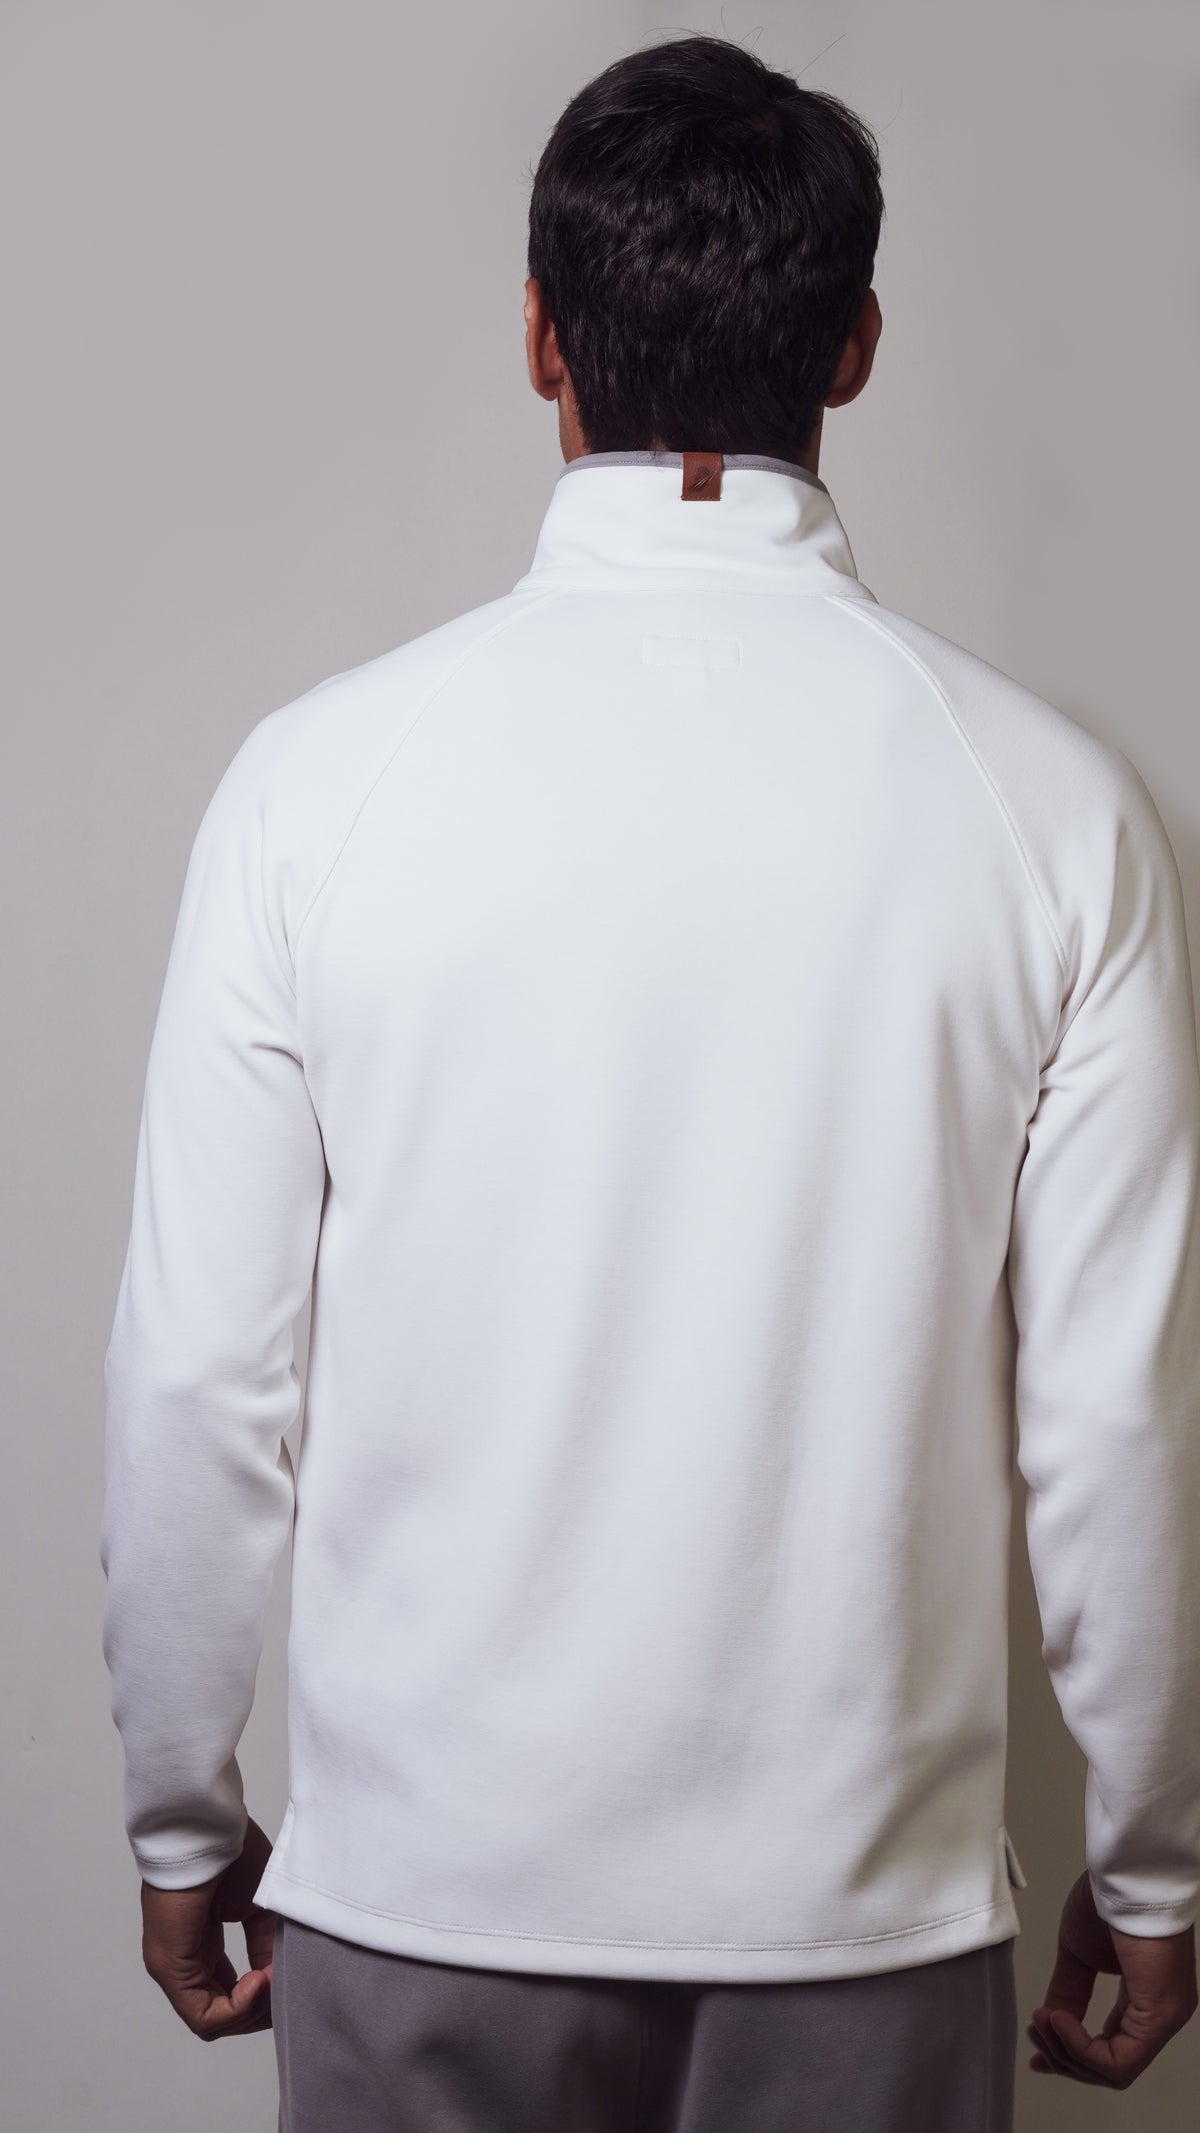 Later On 1/4 Zip Pullover White